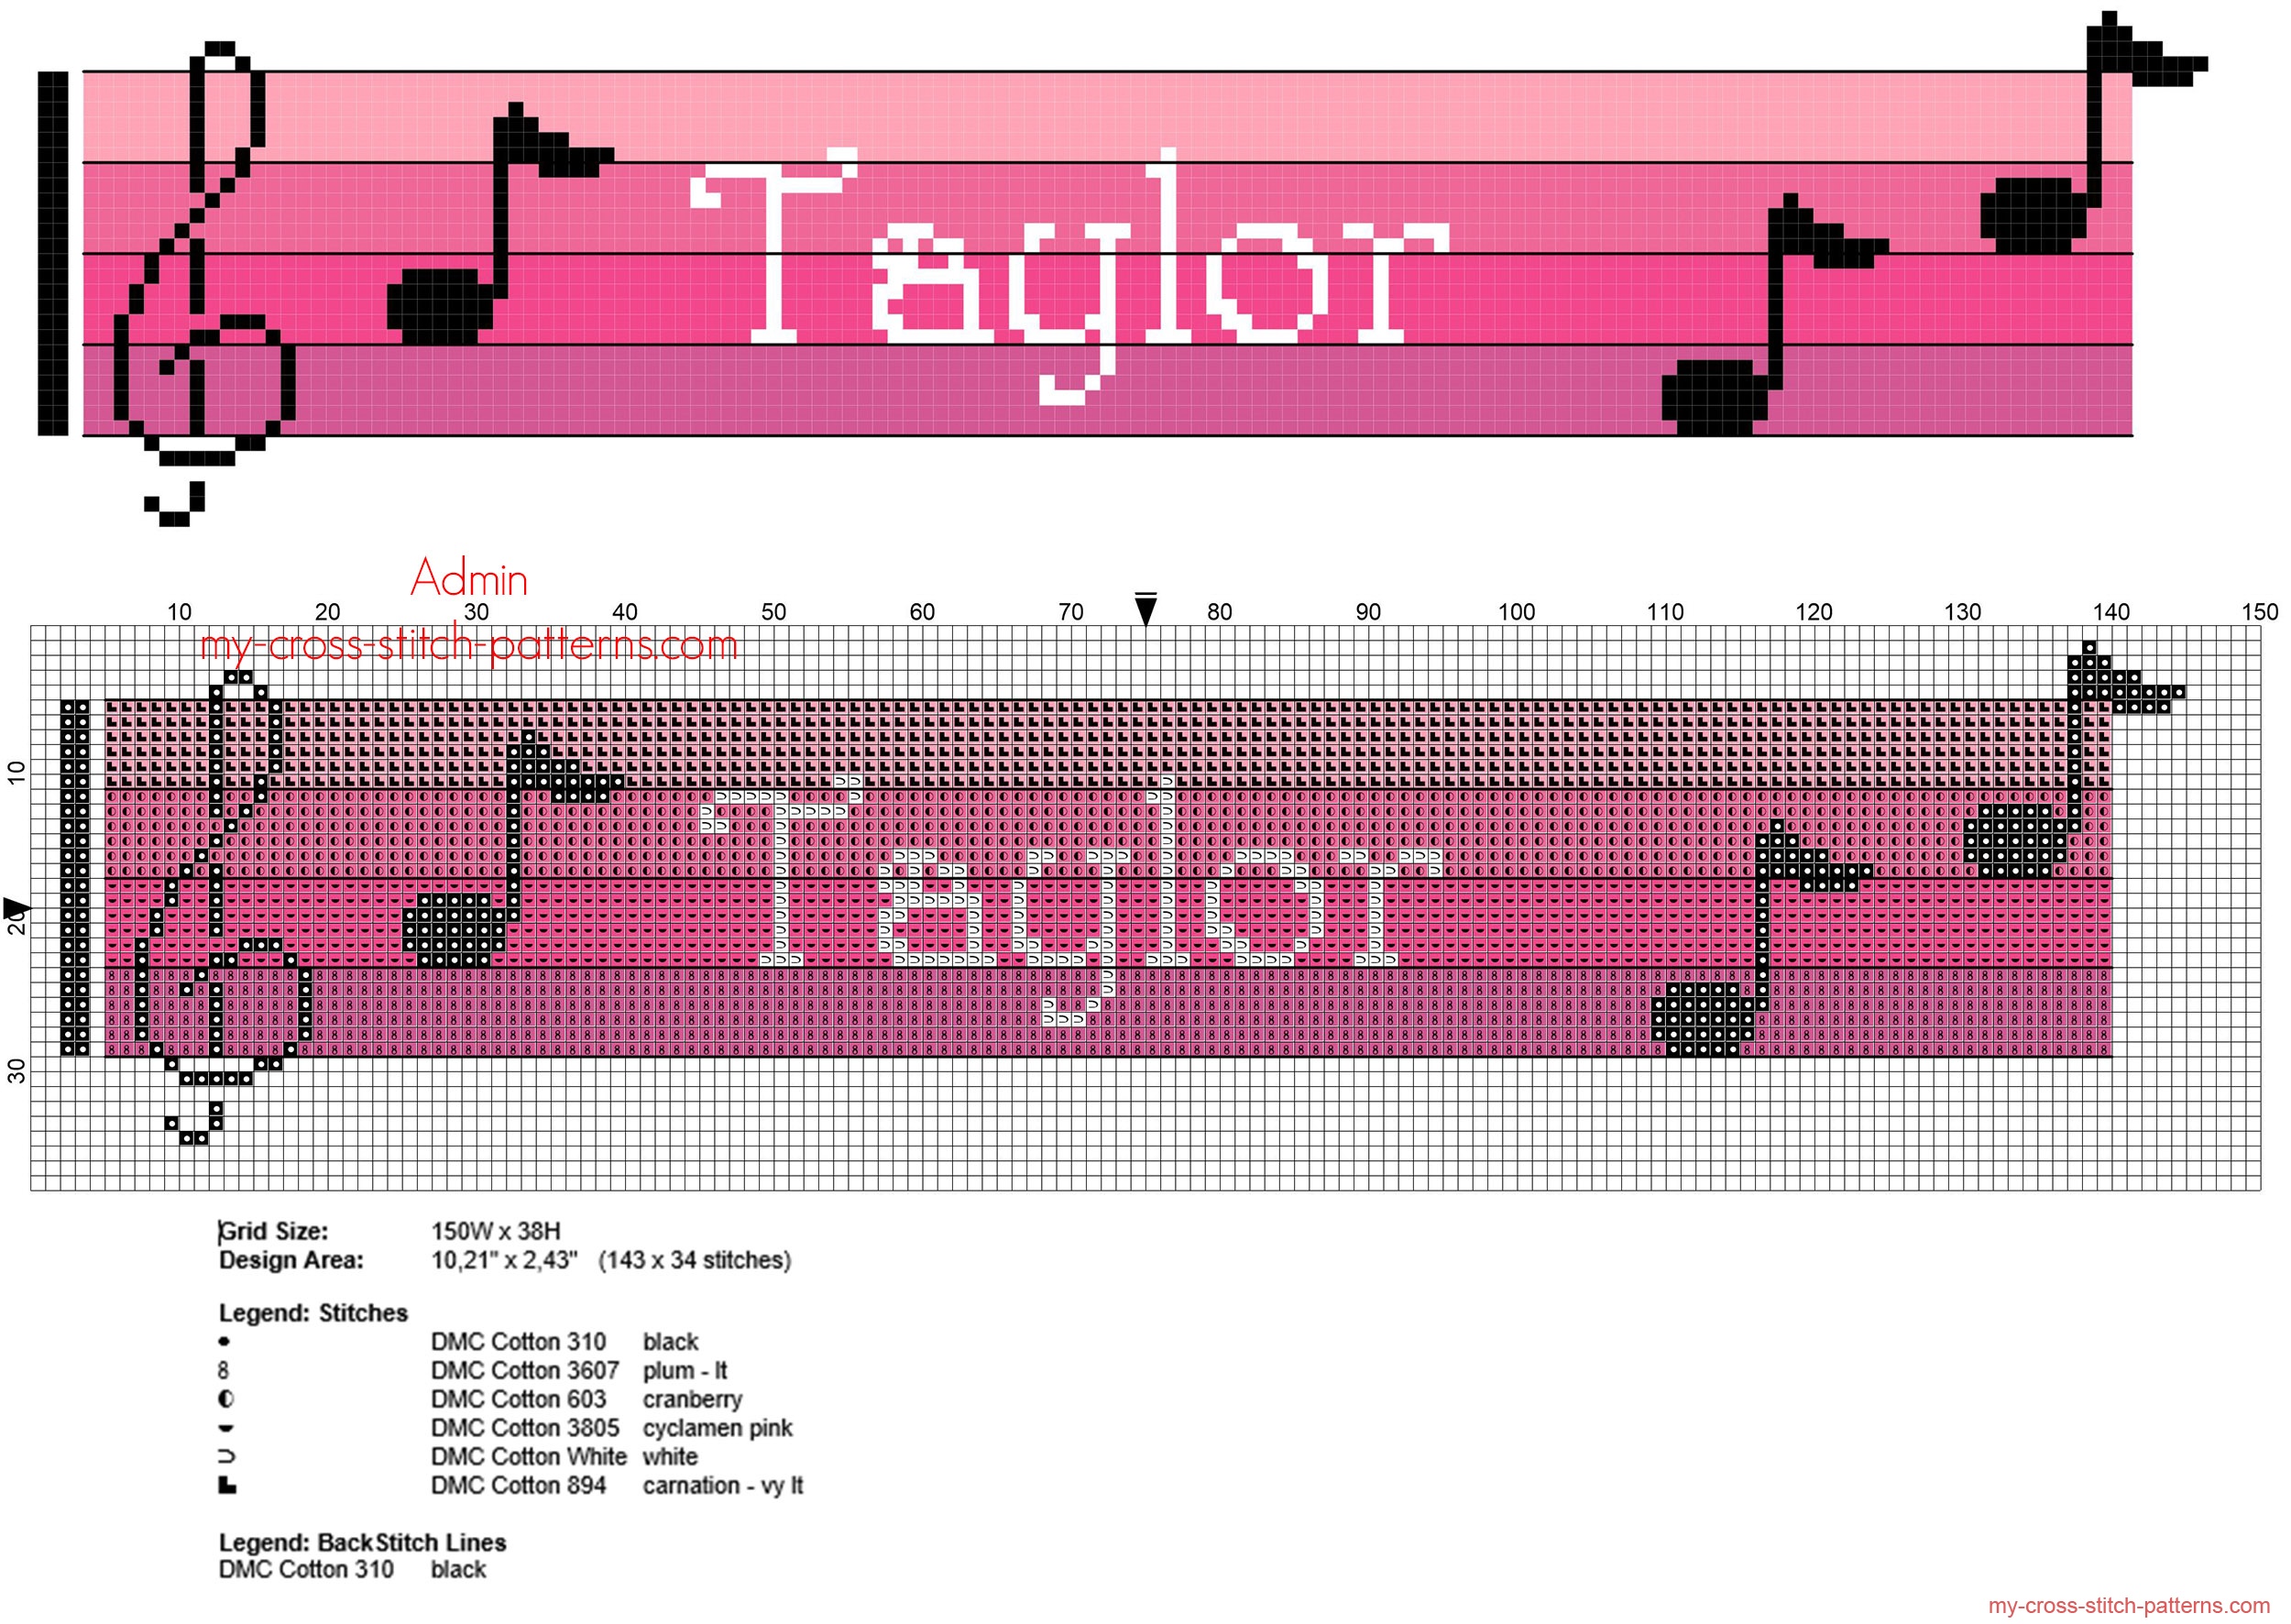 taylor_cross_stitch_baby_female_names_with_pink_musical_notes